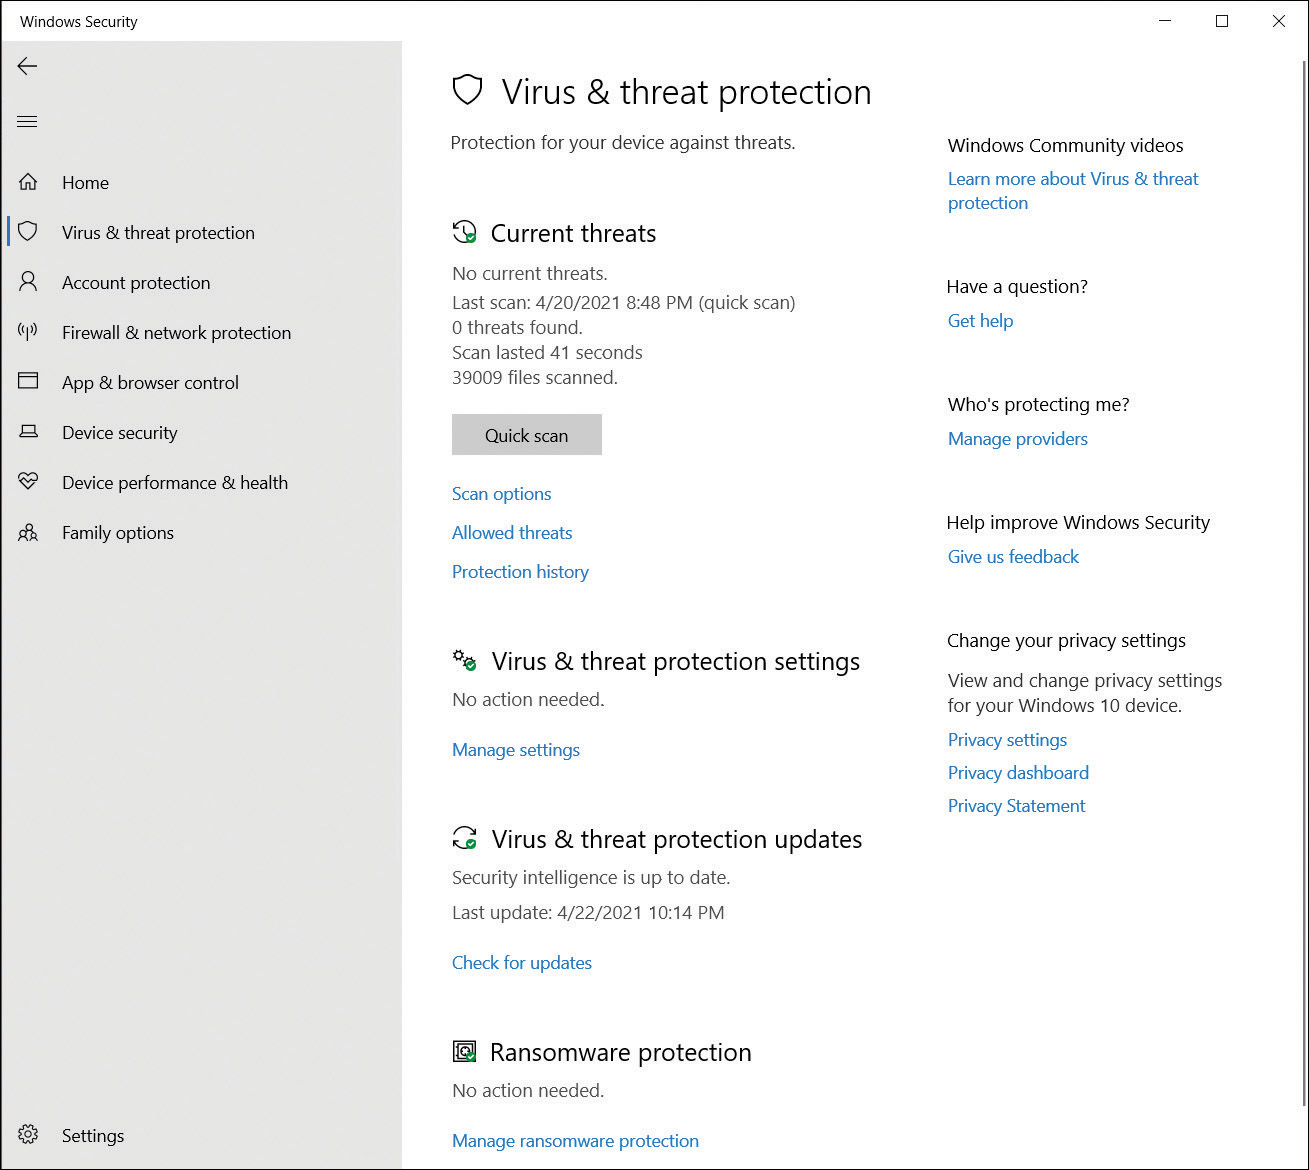 A screenshot shows the Virus & Threat Protection page within the Settings app. On the left is a menu of Windows Security items with the Virus & Threat Protection item selected. In the center of the page is the Virus & Threat Protection settings with the headings Current Threats, Virus & Threat Protection Settings, Virus & Threat Protection Updates and Ransomware Protection.